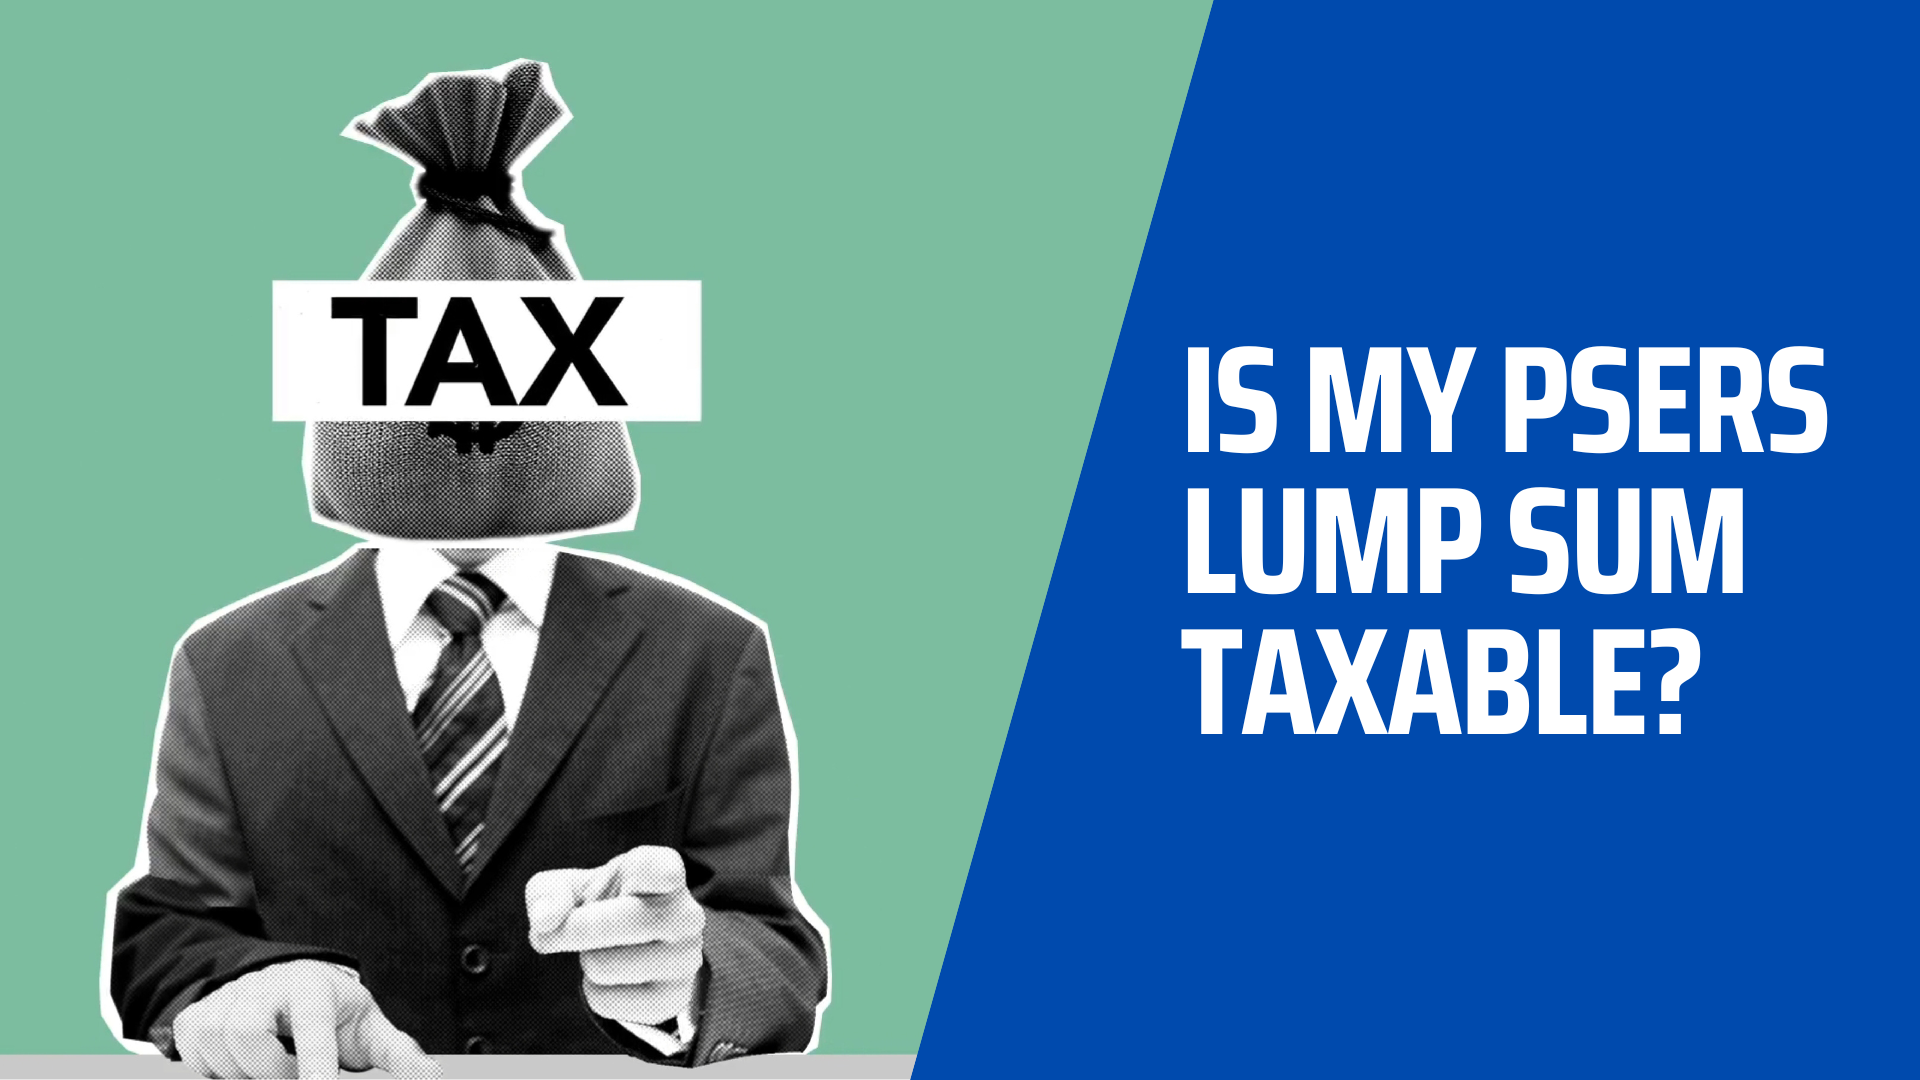 Is my PSERS lump sum taxable?